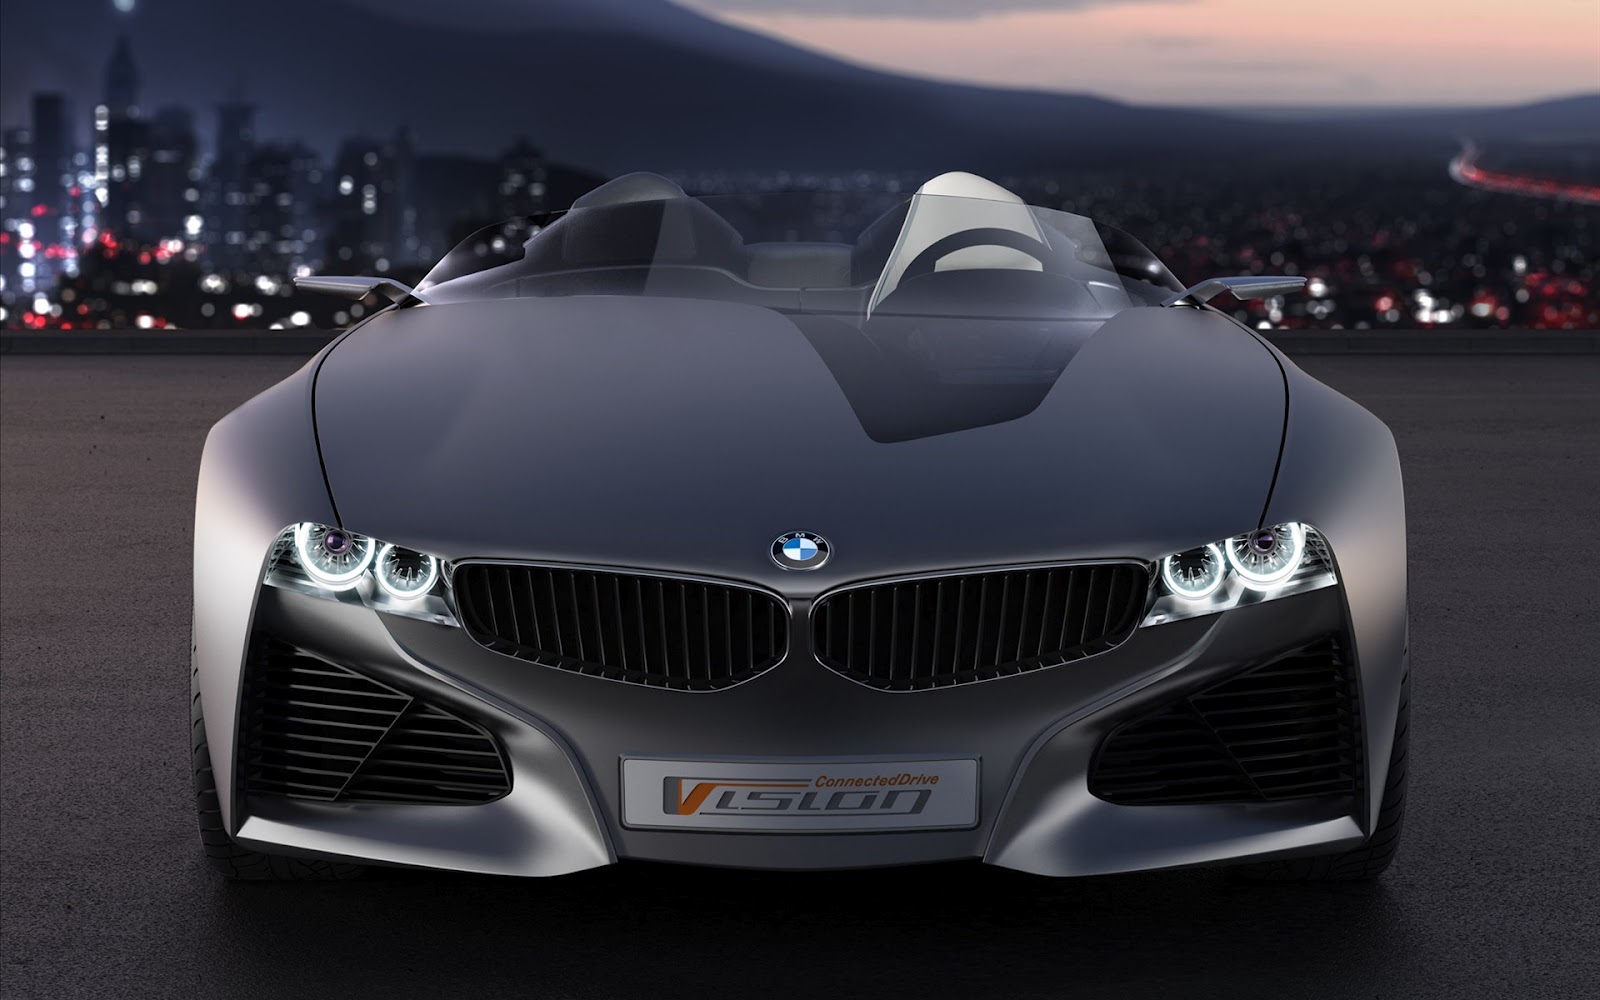 Desktop Bmwcarhd With Hd Bmw Car Image For Laptop Wallpapers - Bmw Vision Connecteddrive Concept - HD Wallpaper 